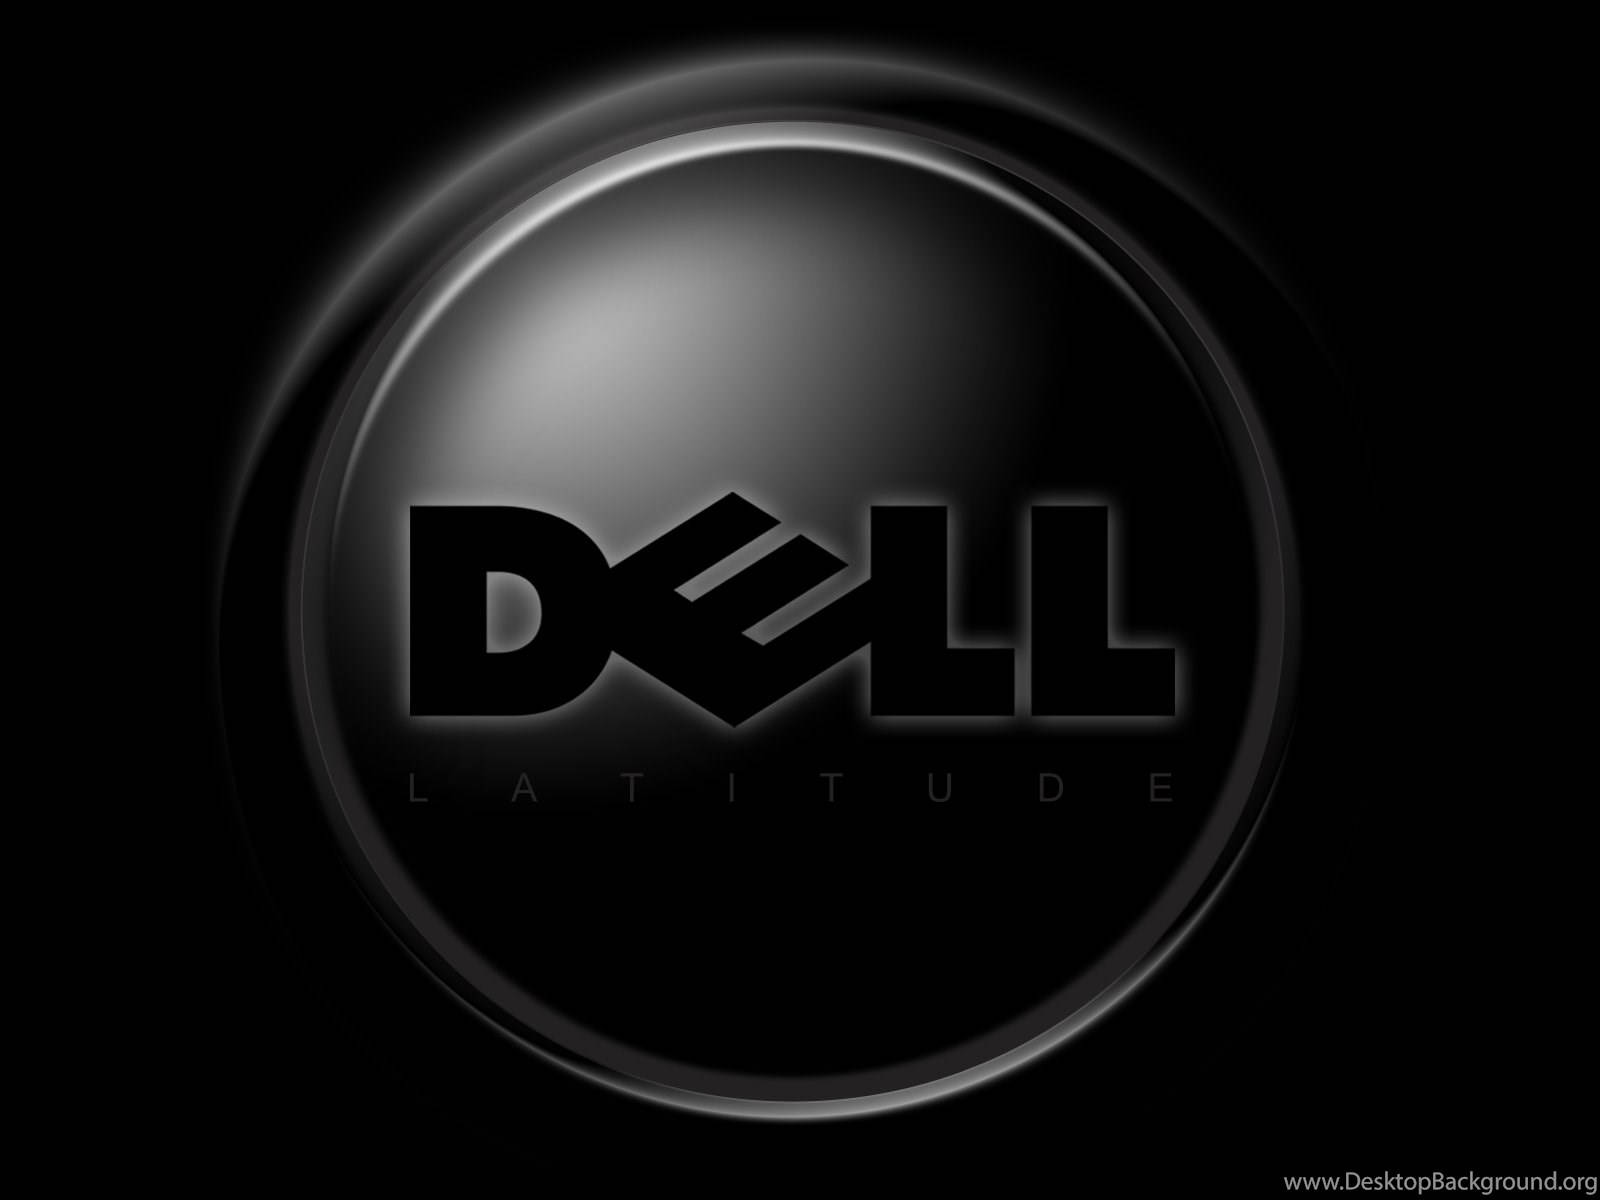 Immersive Dell Hd Display Screen Background